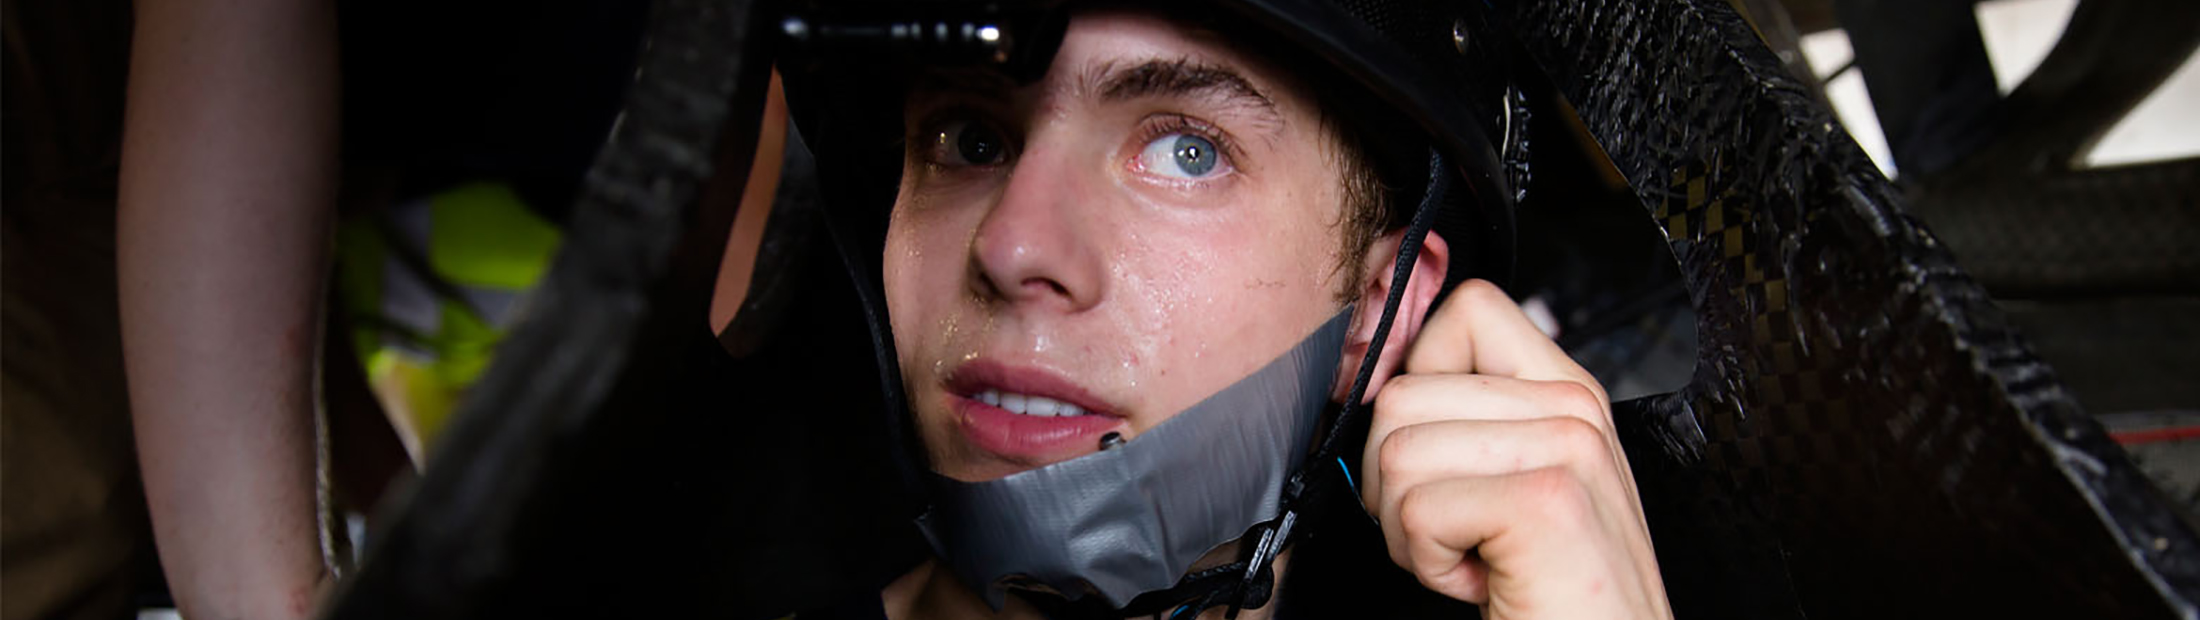 Close up image of the Novum driver Nate Silverman sweating after driving